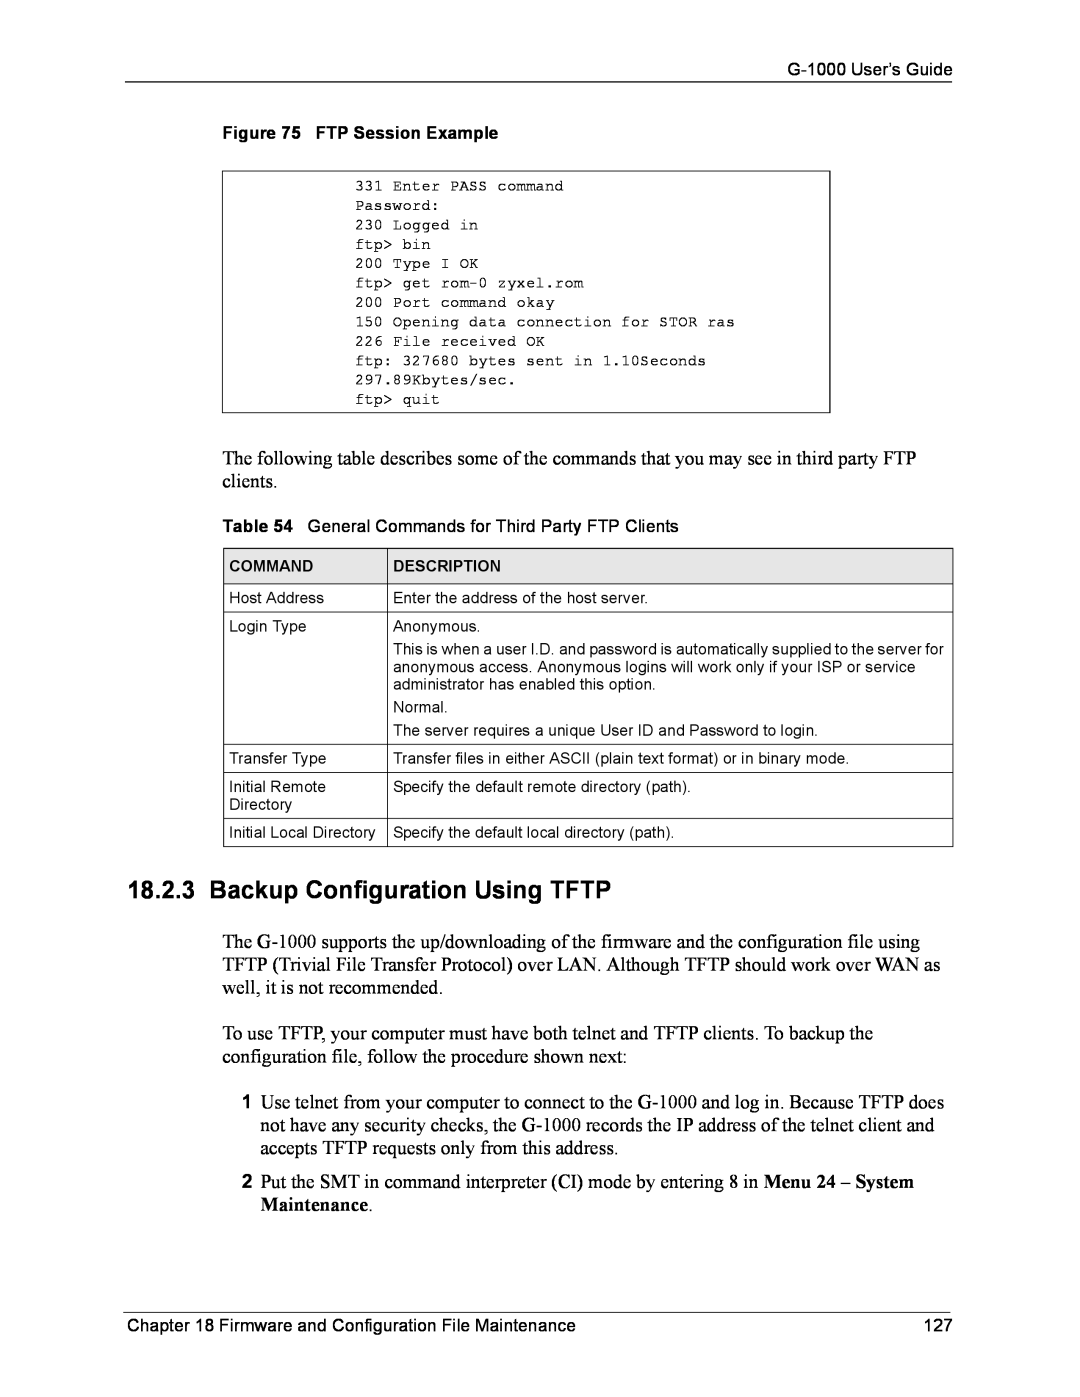 ZyXEL Communications G-1000 manual Backup Configuration Using TFTP, FTP Session Example 